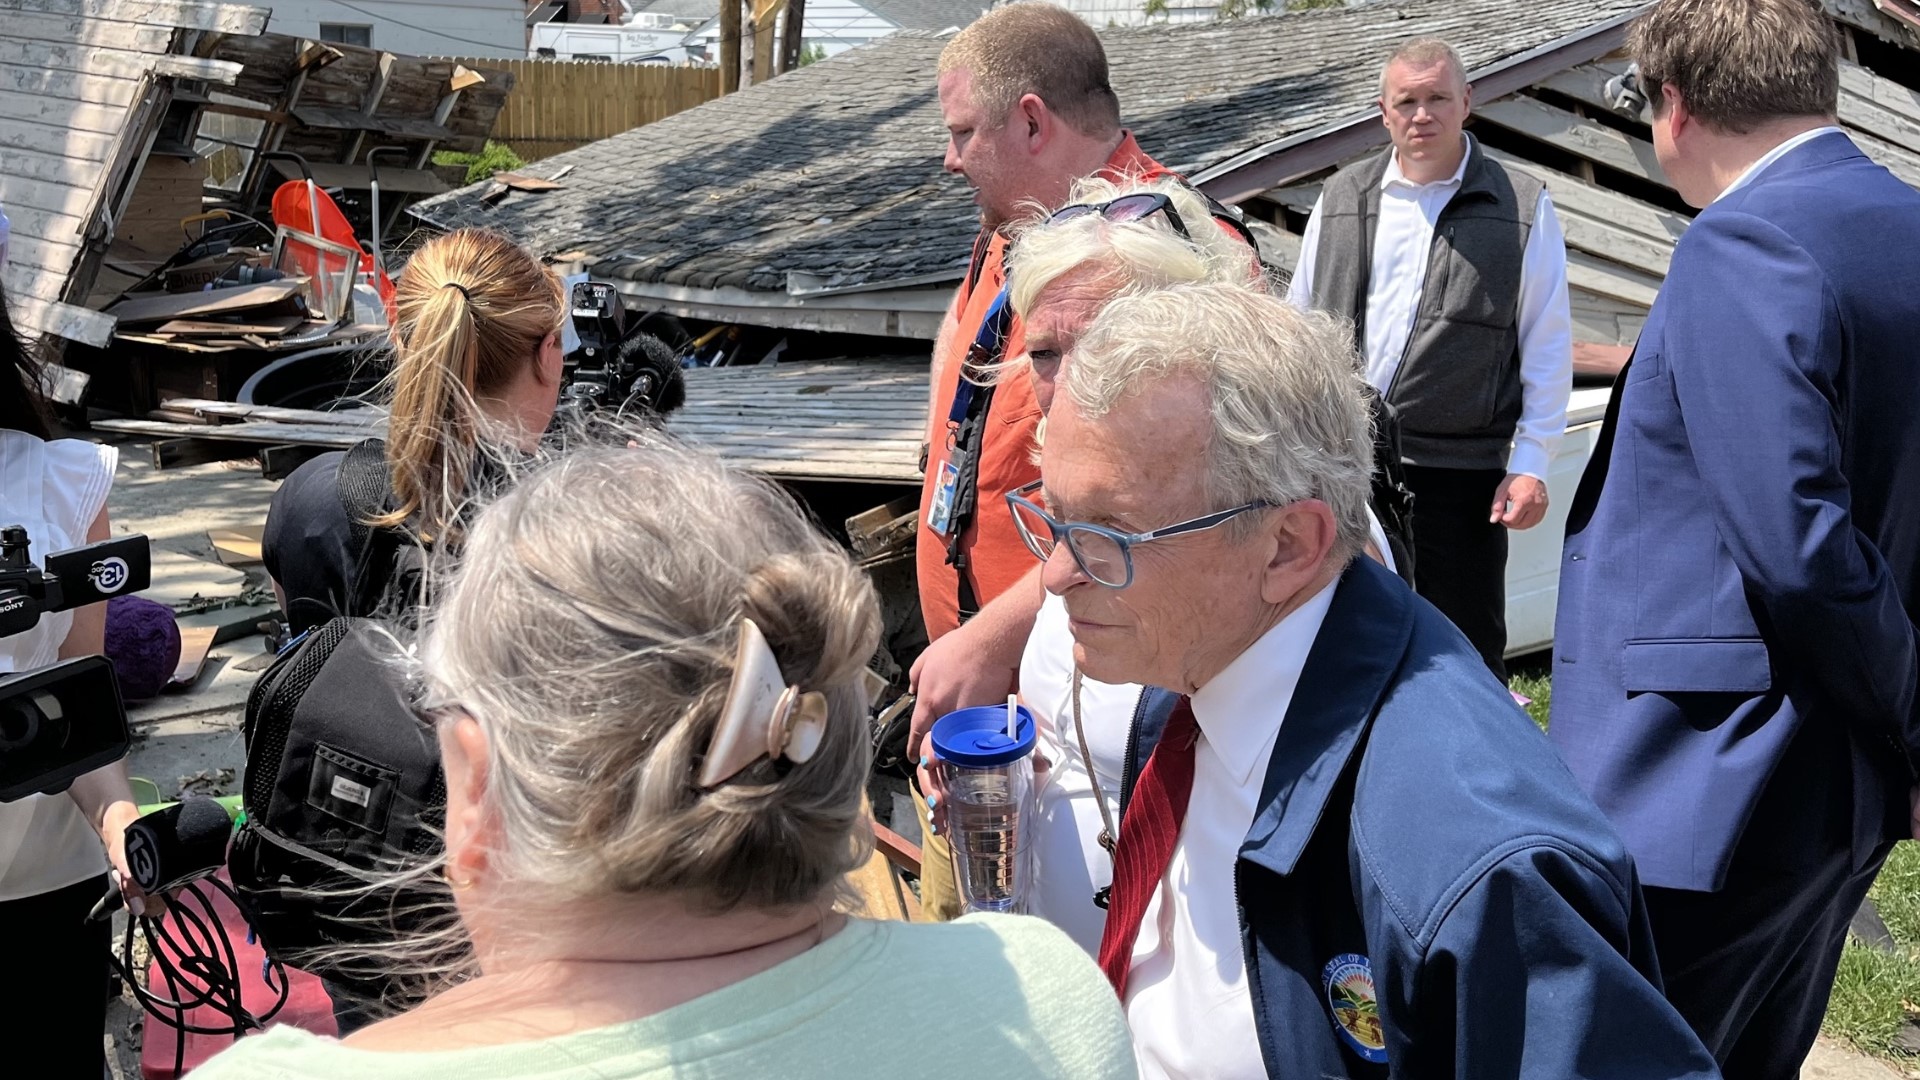 "I'm not saying anyone did anything wrong or did anything bad, but the weather service really owes us, I think, a really full explanation," DeWine said.